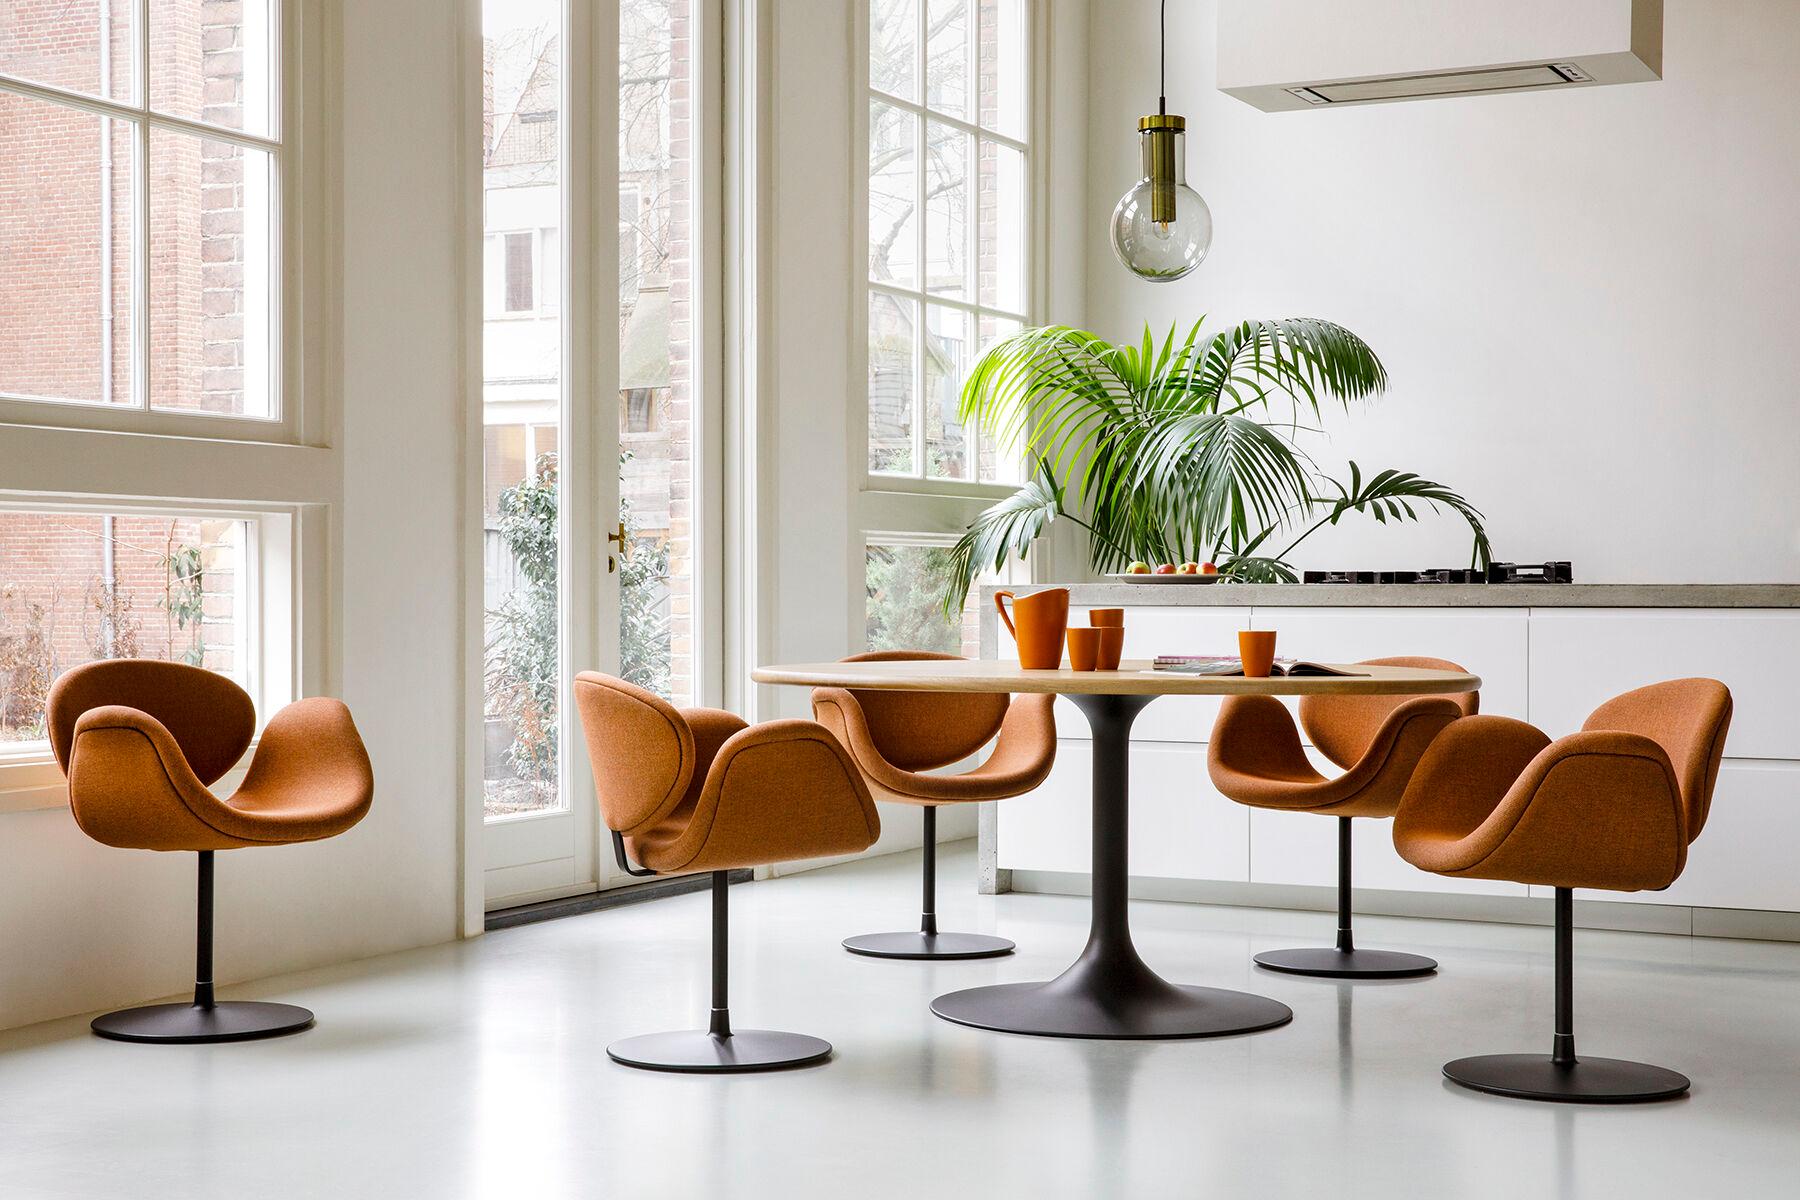 Vinyl
The Tulip Midi was the missing member of the Tulip family for a long time. The armchair was designed by Pierre Paulin in 1960 and now completes the Tulip series for Artifort. In terms of its dimensions, this midsize armchair is the perfect